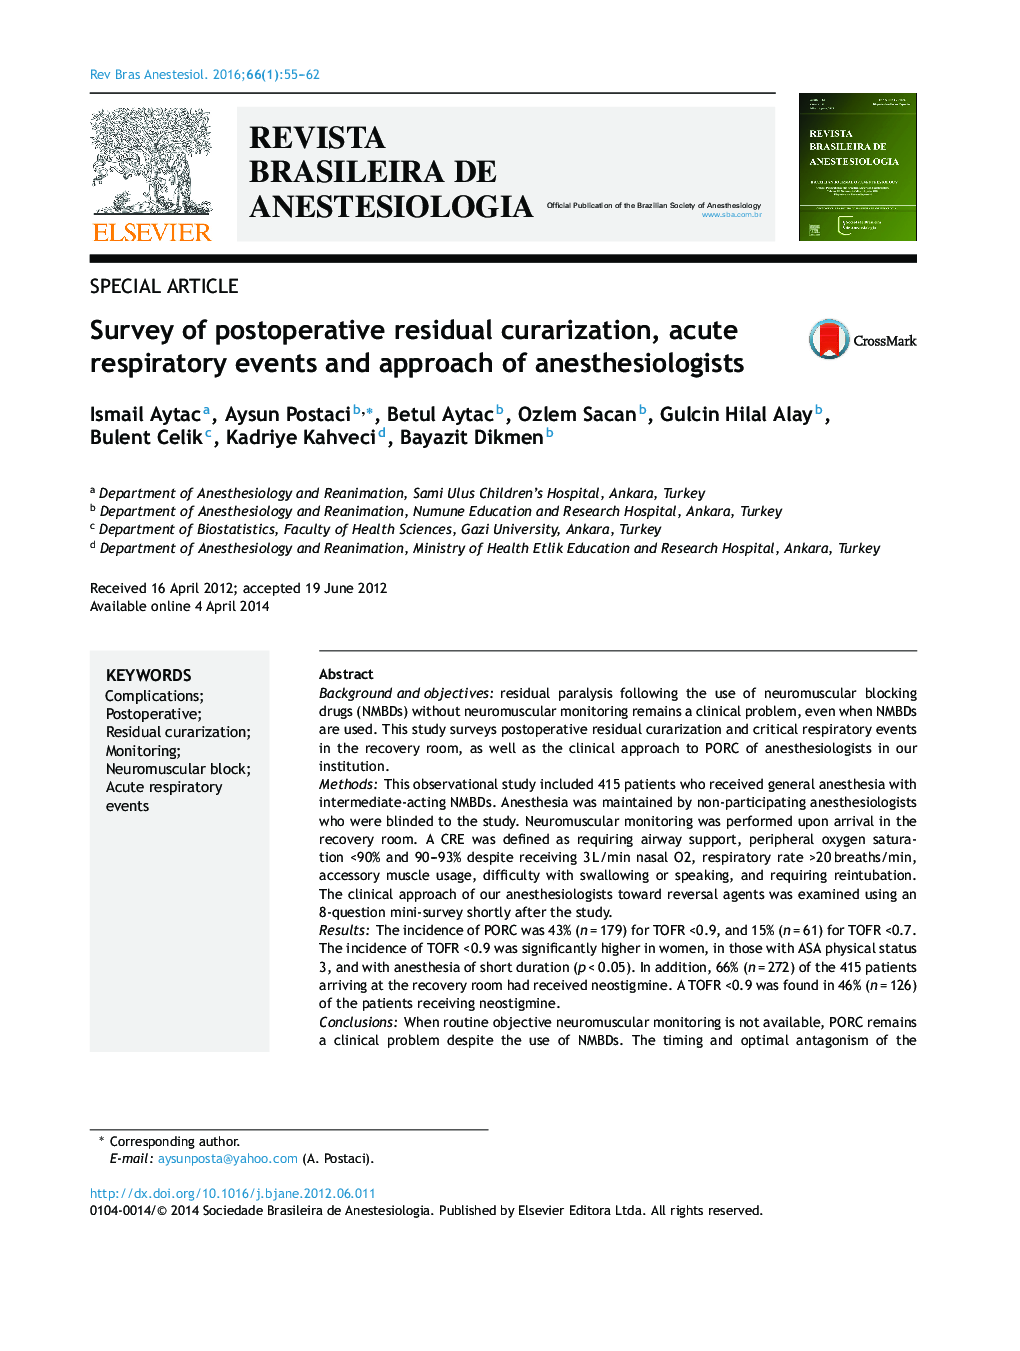 Survey of postoperative residual curarization, acute respiratory events and approach of anesthesiologists